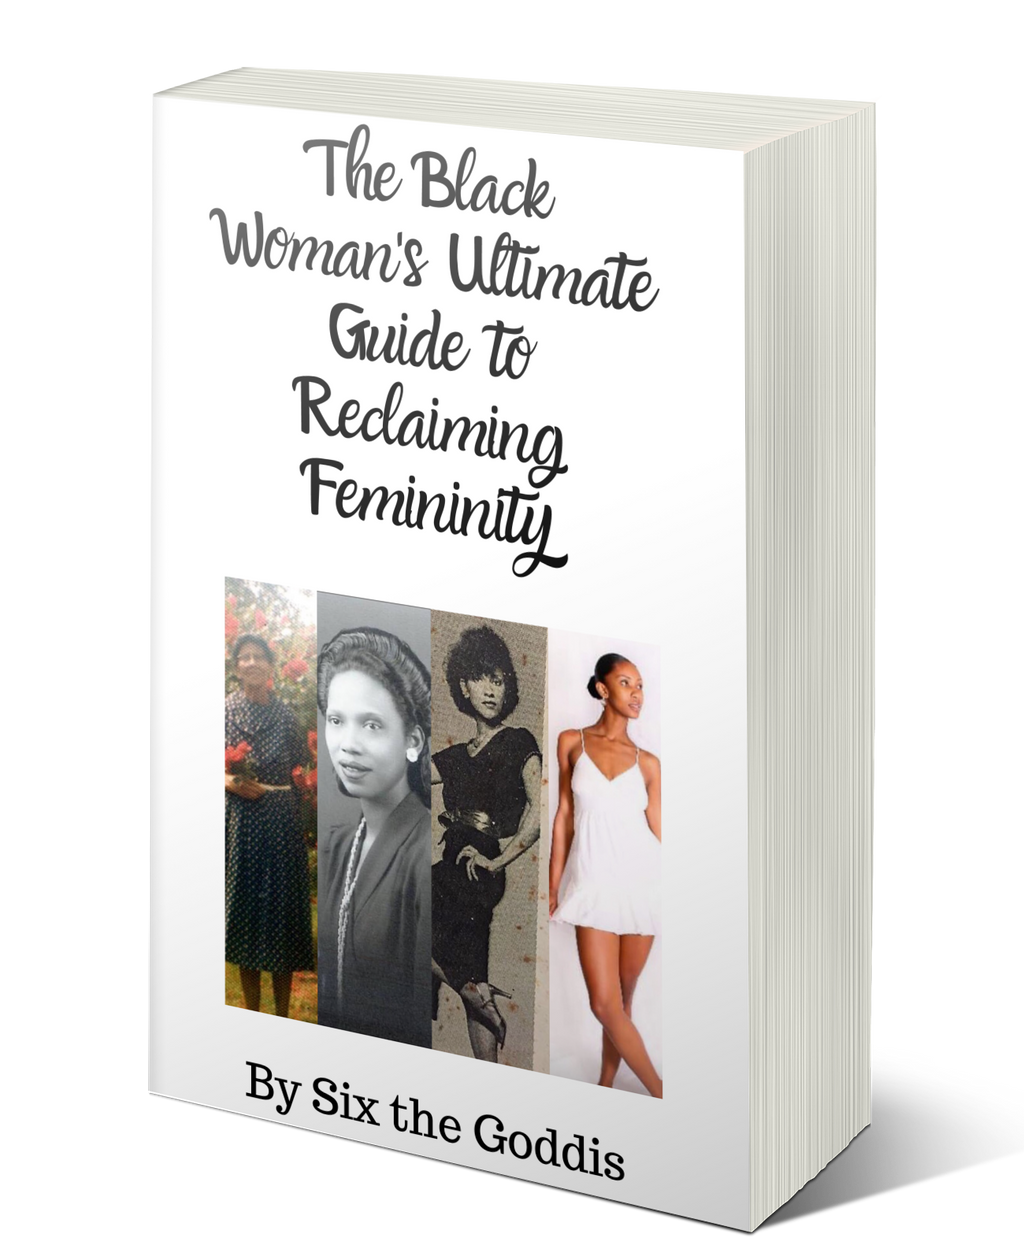 The Black Woman's Ultimate Guide to Reclaiming Femininity. Hard Copy. Perfect Bound.